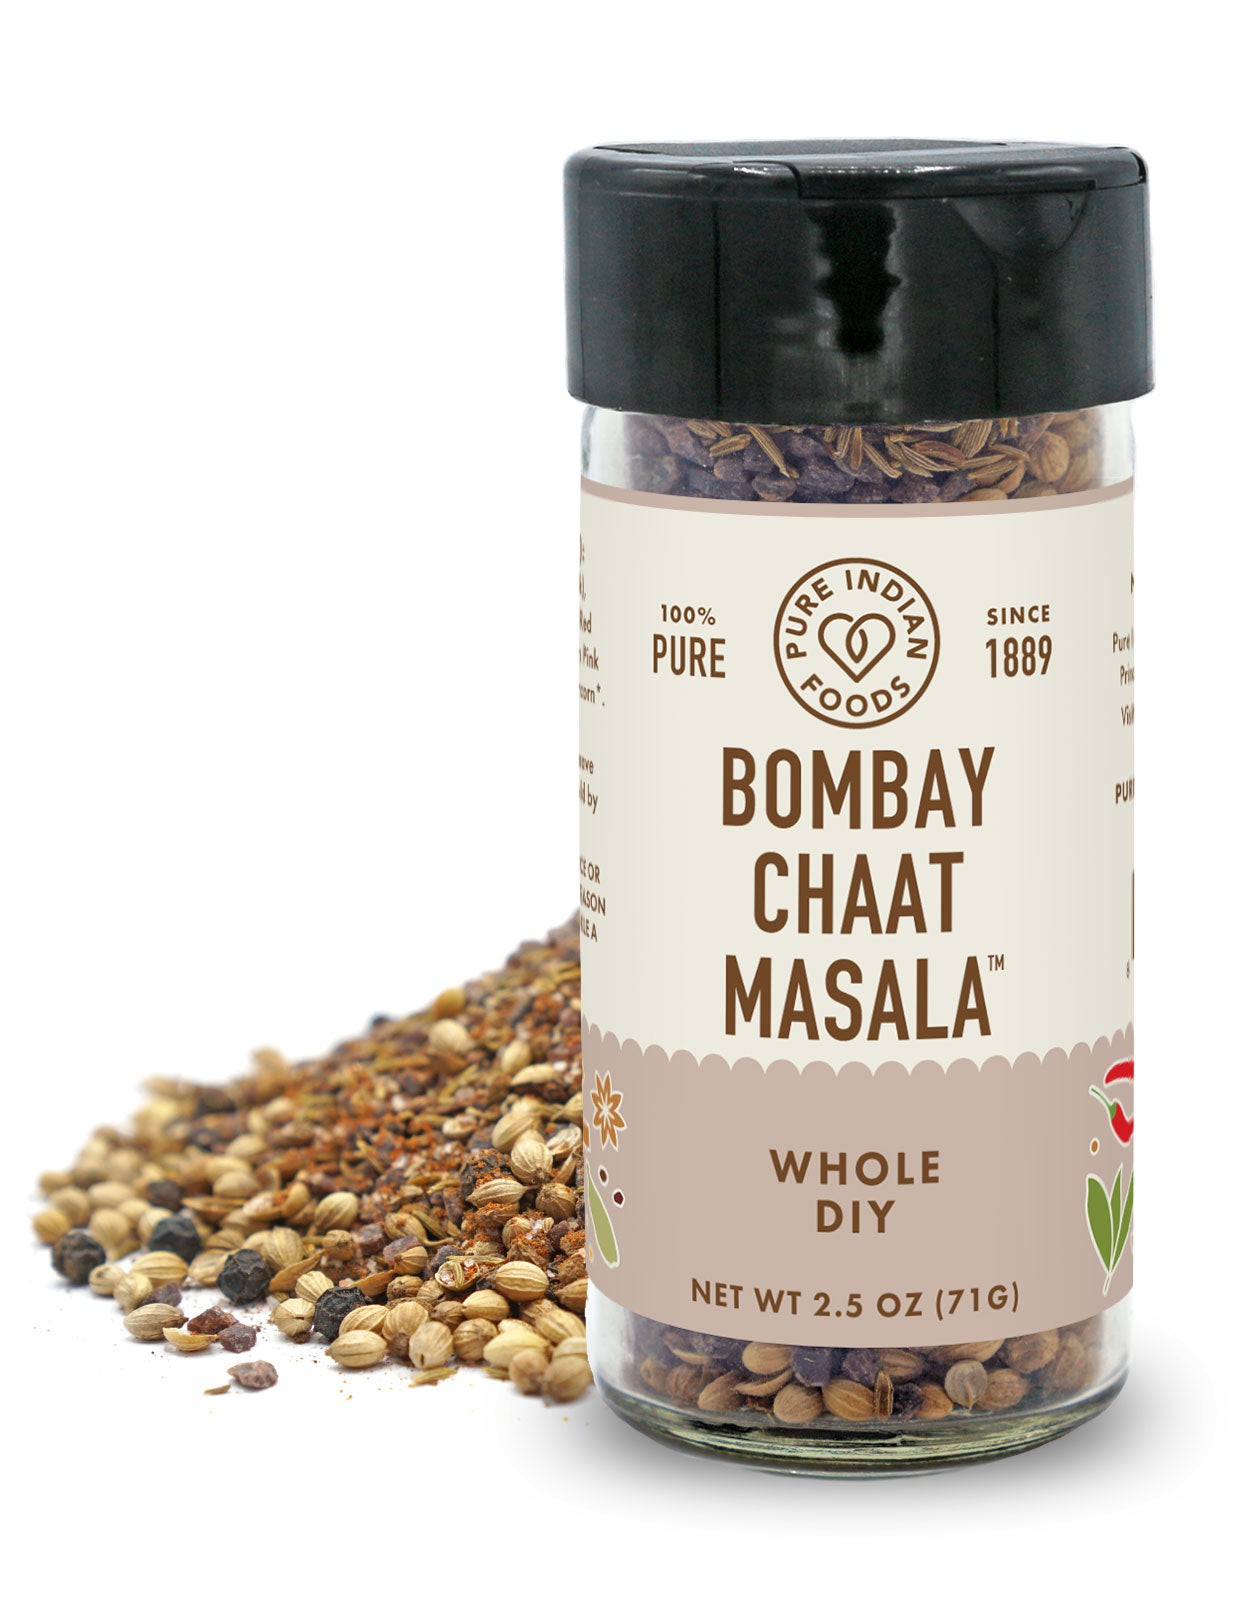 Bombay Chaat Masala DIY - Whole Spices, Certified Organic - 2.5 oz